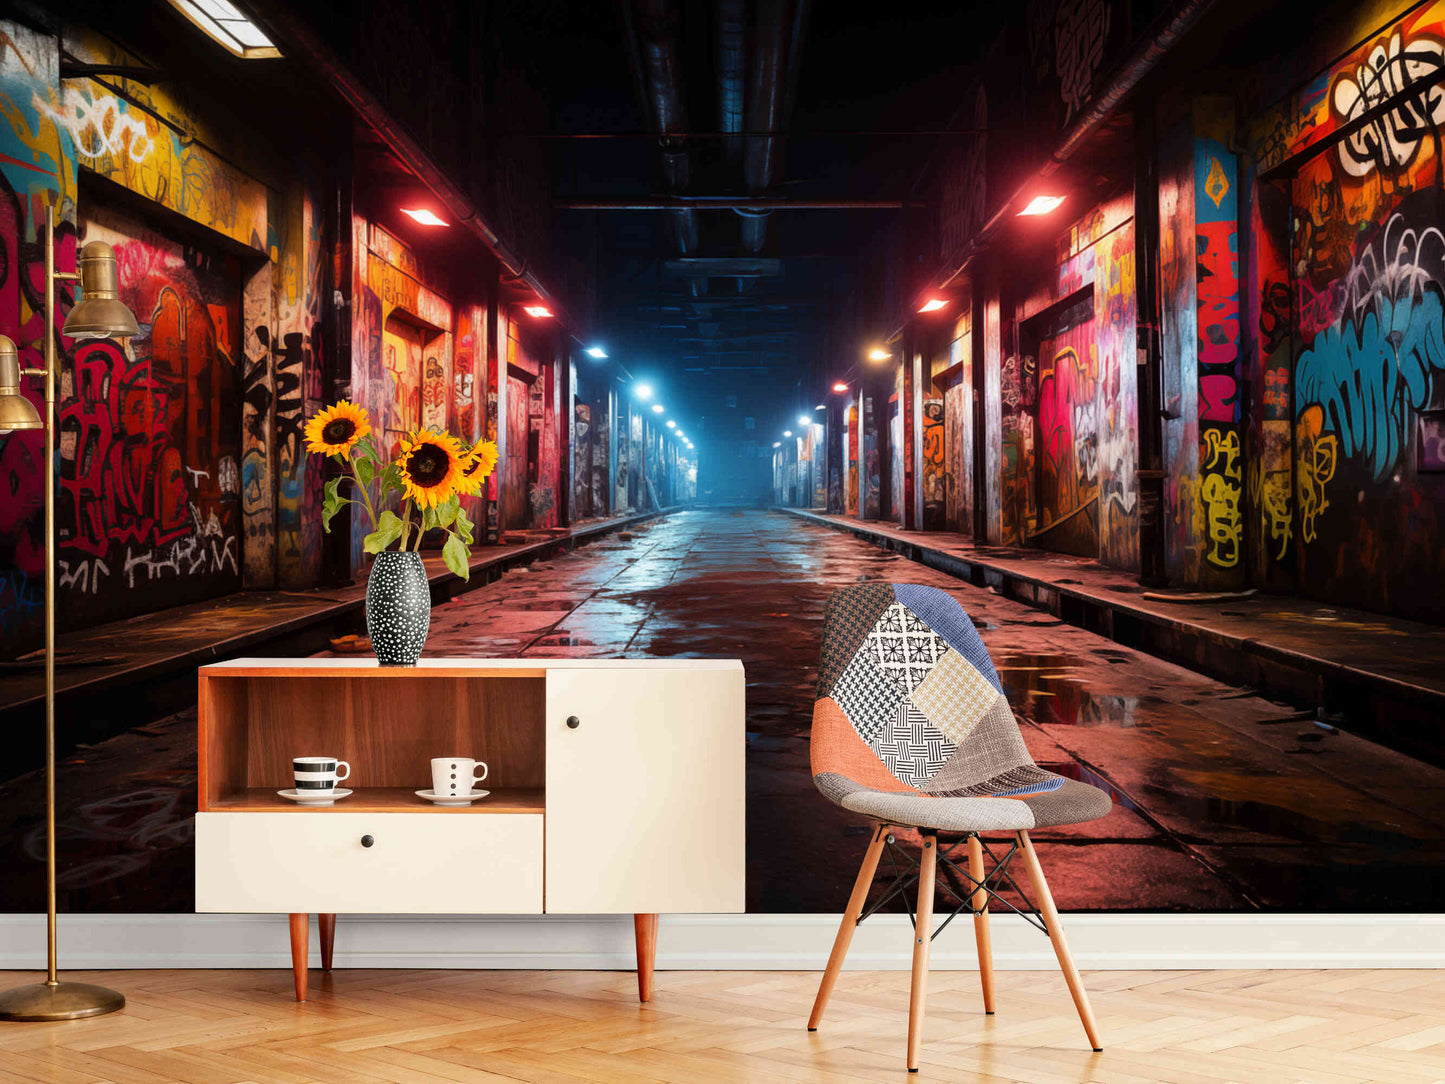 Twilight meets neon in this urban landscape wallpaper, blending day and night in a stunning mural